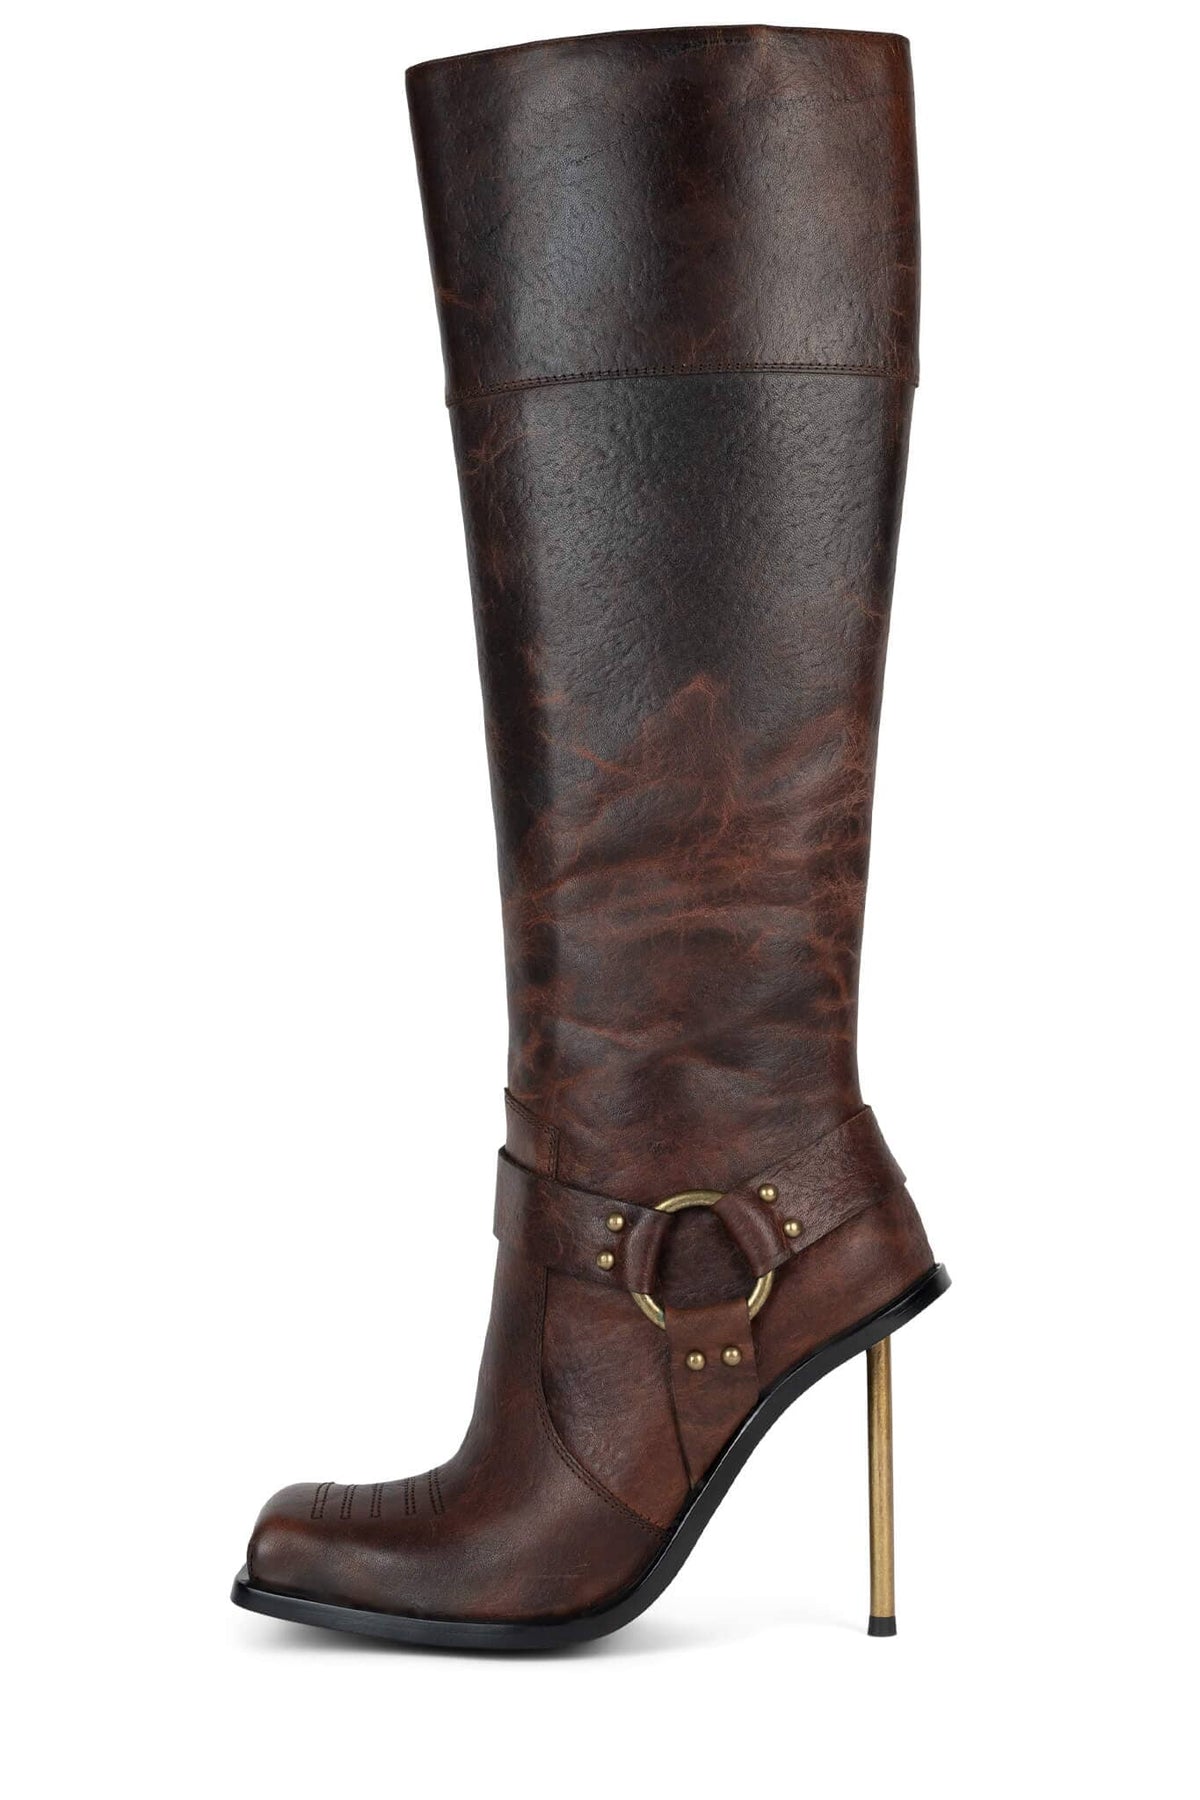 ADVENTURE Jeffrey Campbell High Heeled Boots Brown Distressed Gold